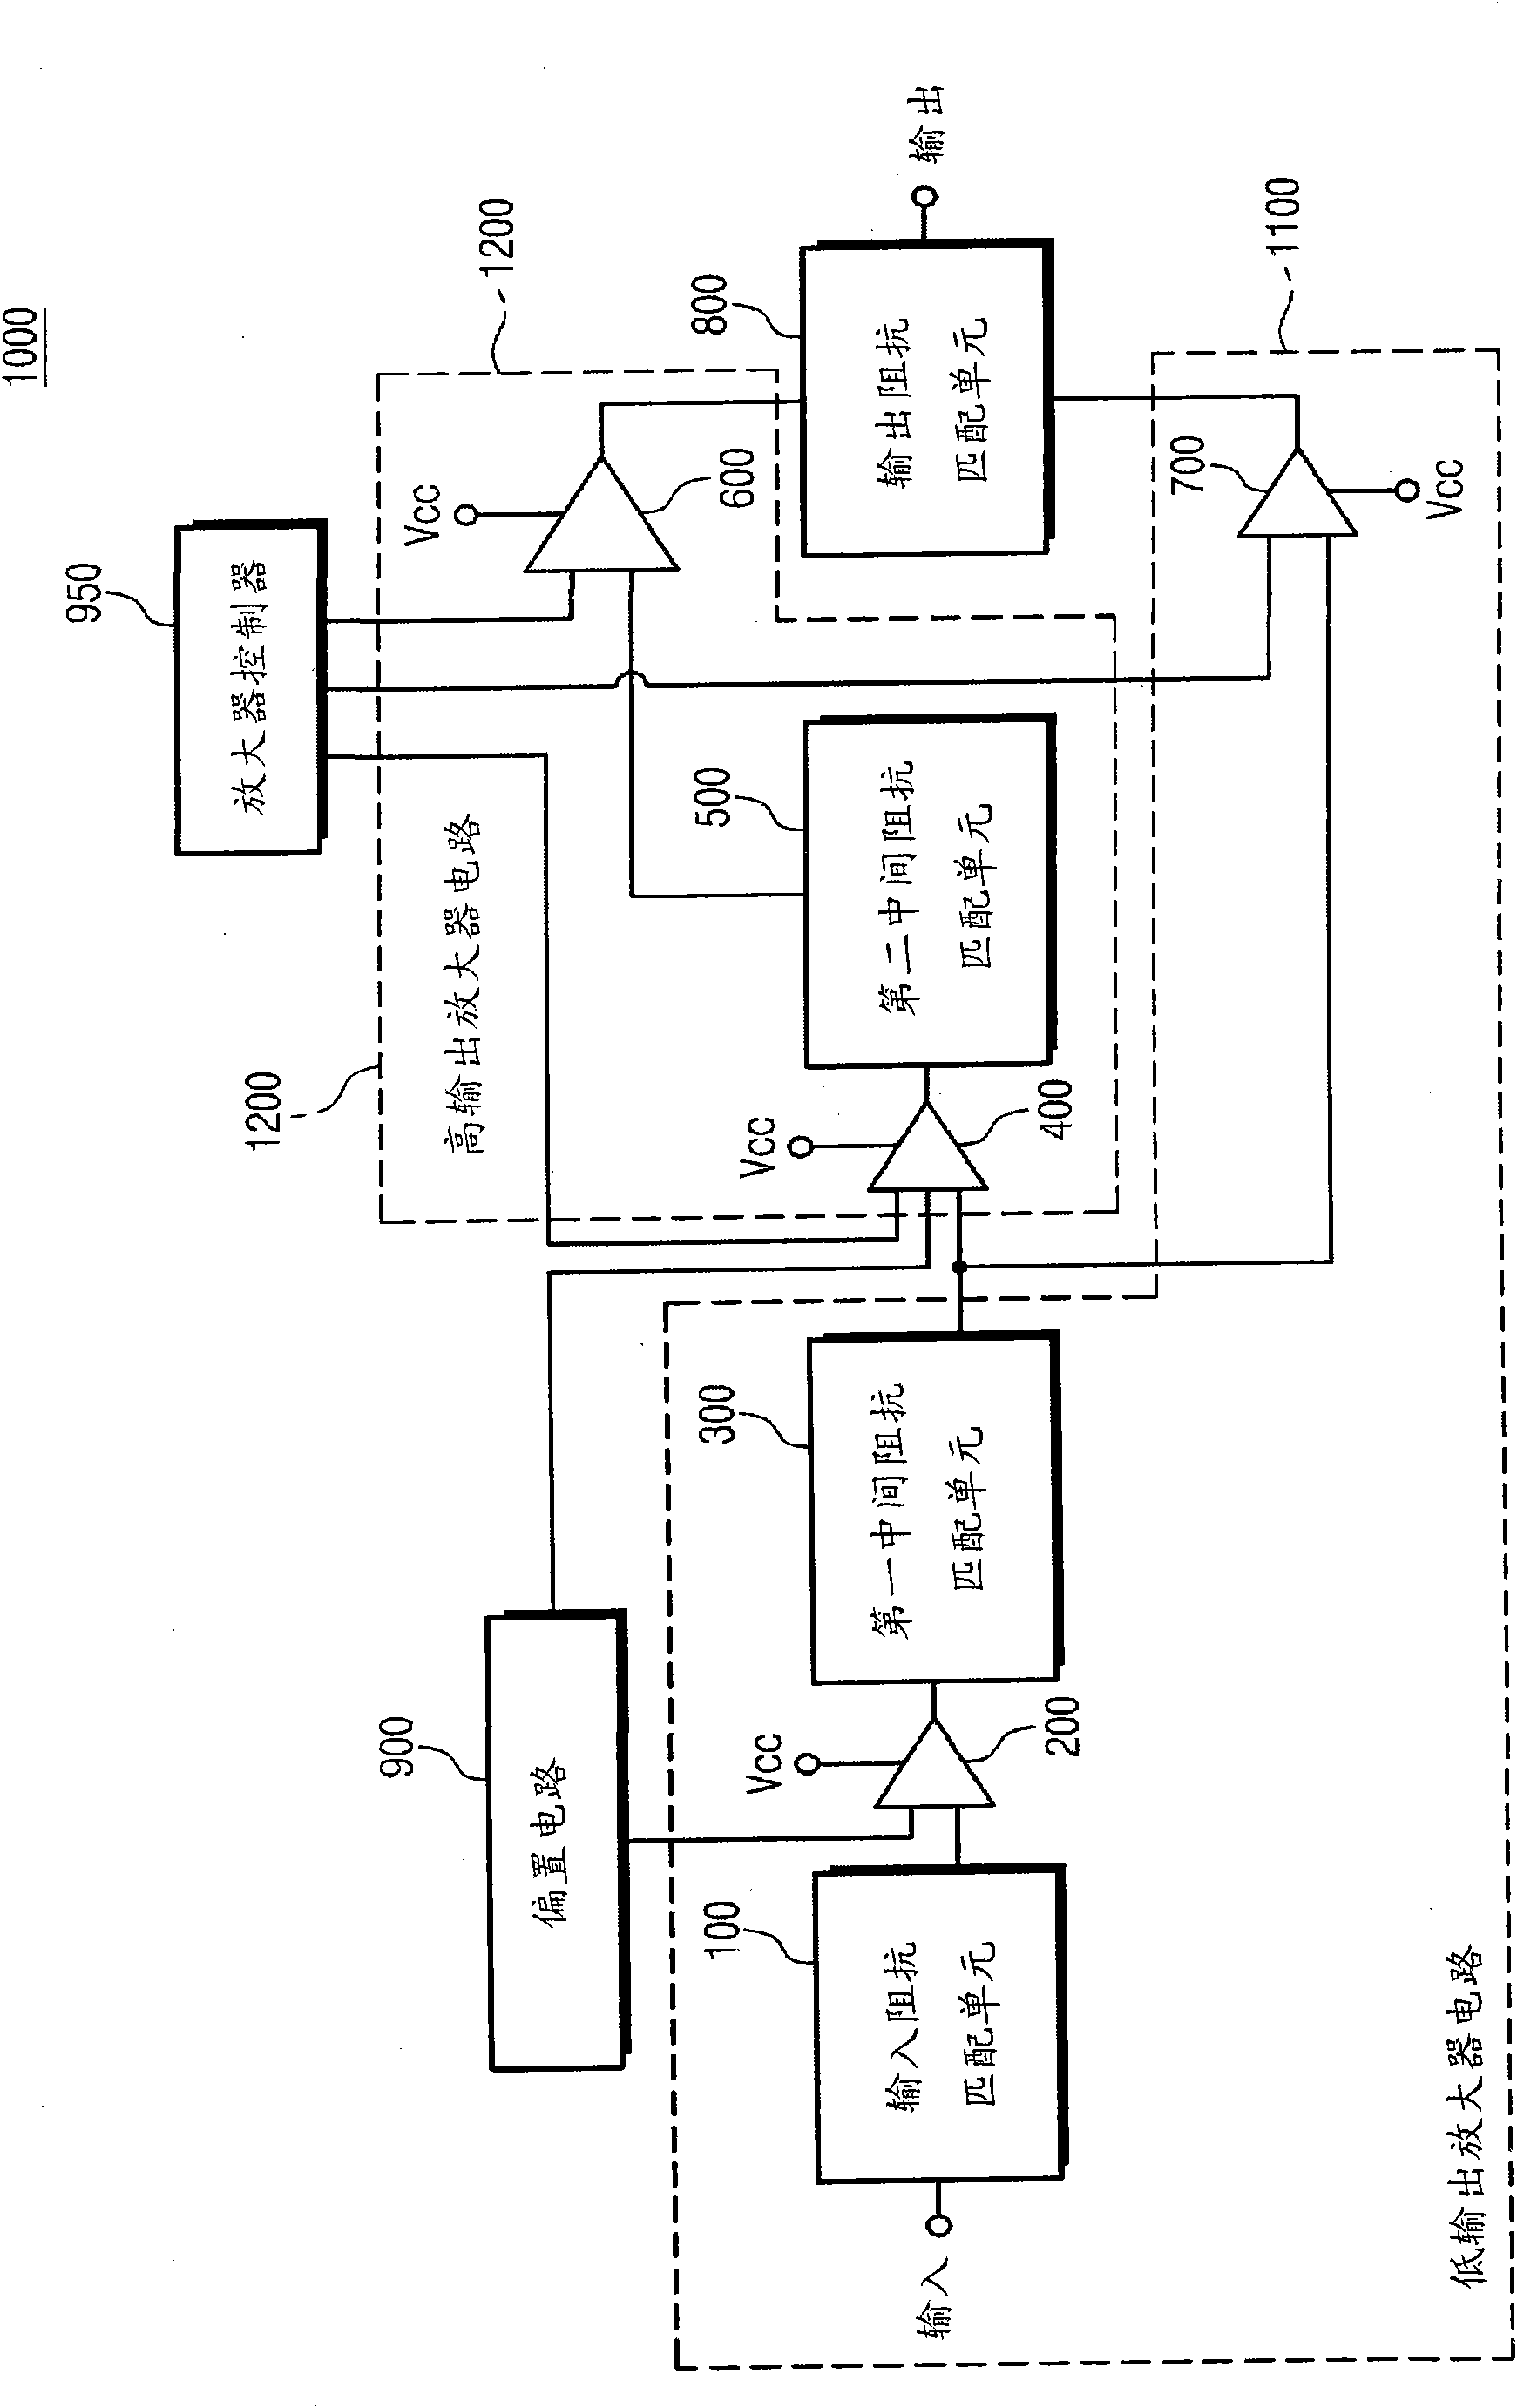 Low power consumptive mixed mode power amplifier